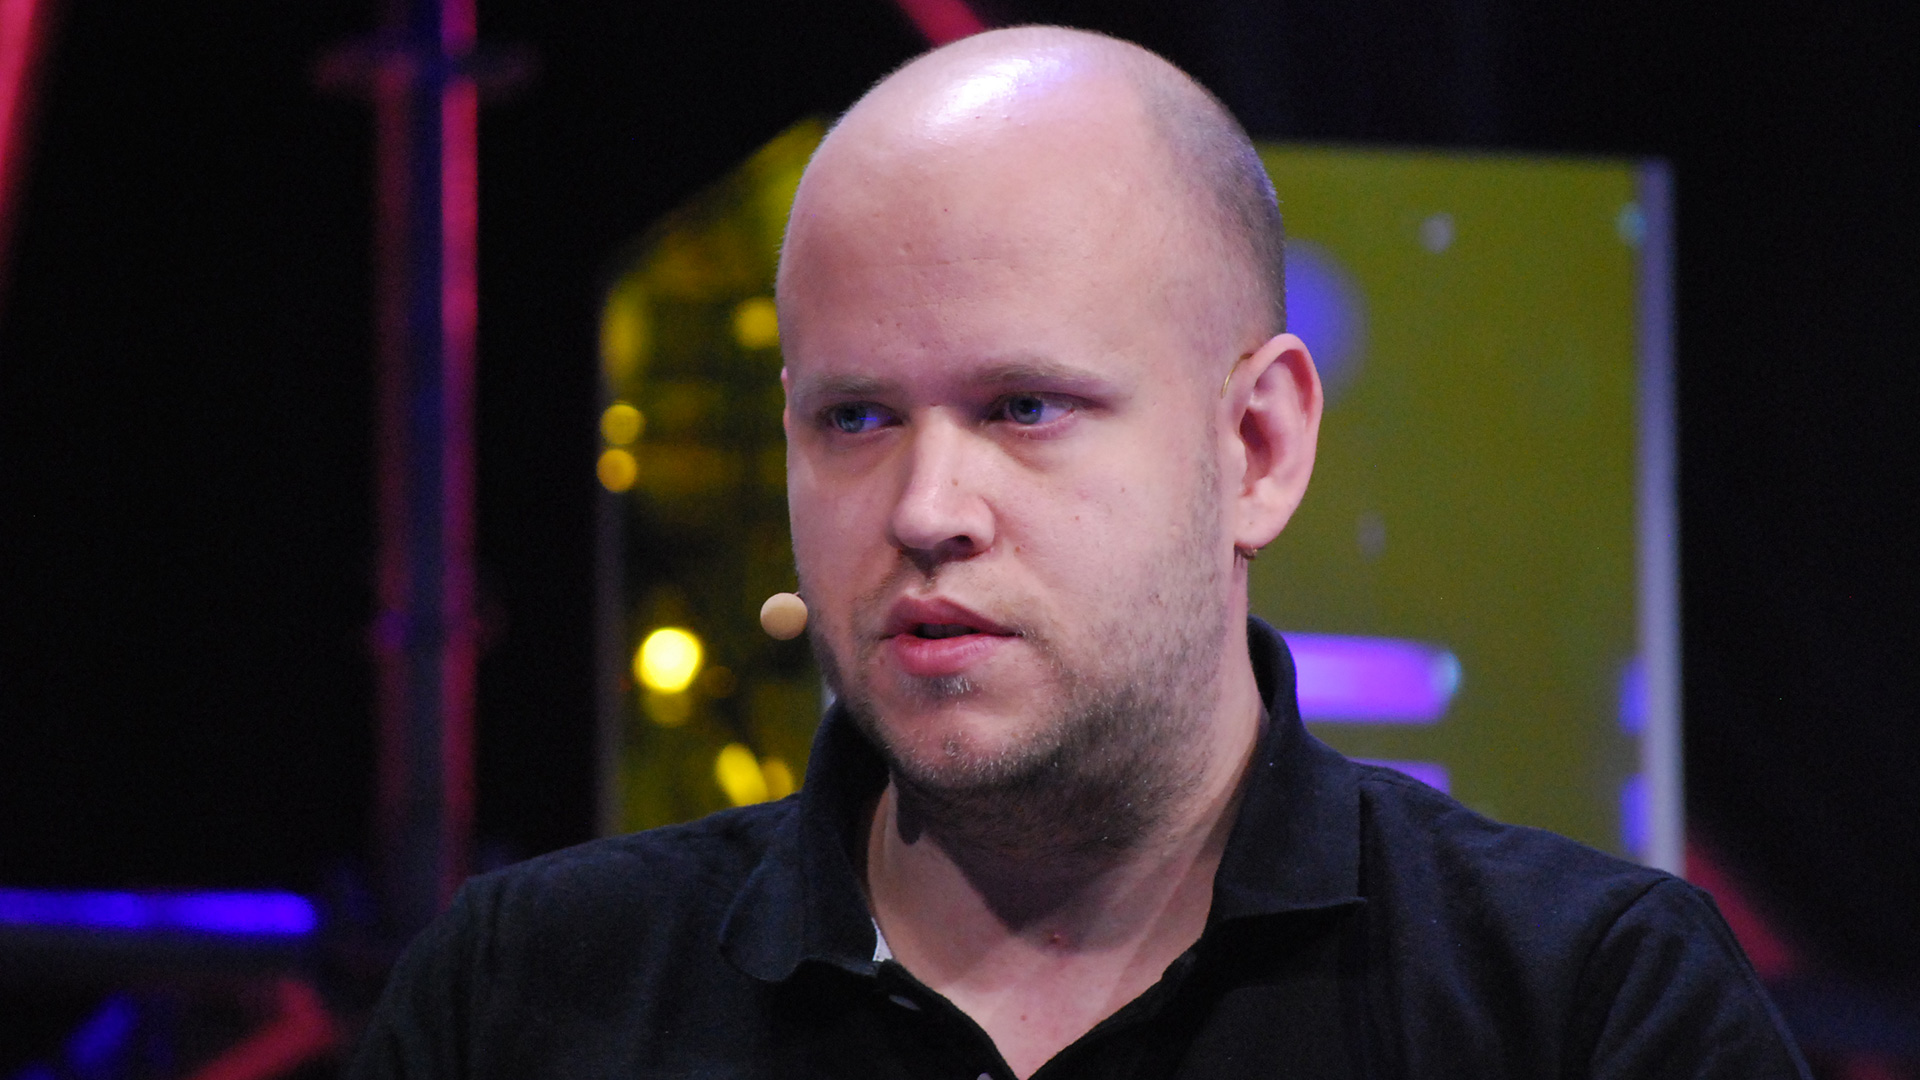 A photo of Daniel Eck, founder and CEO of Spotify